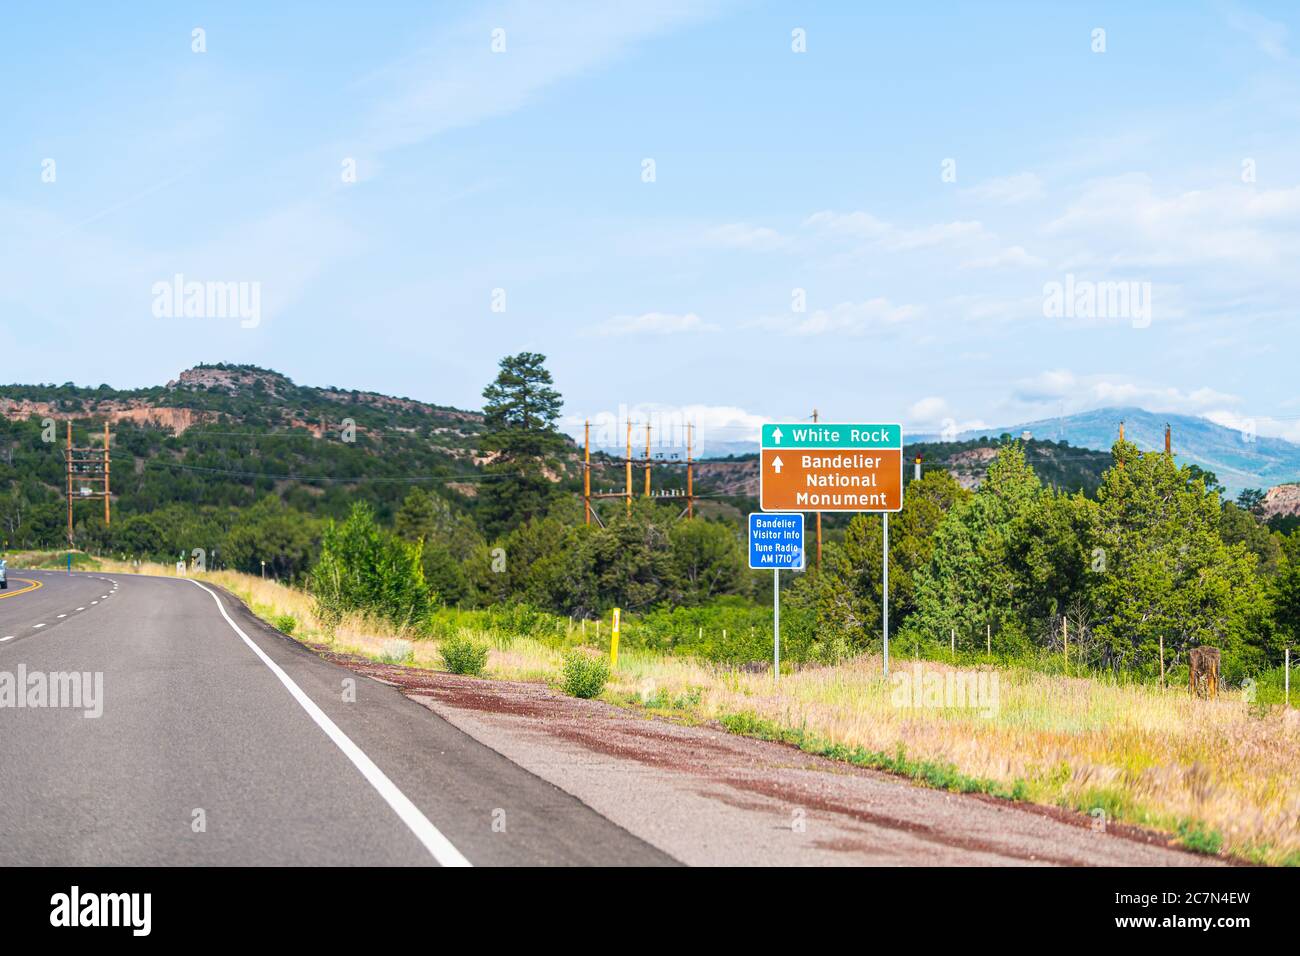 Santa Fe county, New Mexico desert with road highway to White Rock and Bandelier National Monument information sign Stock Photo